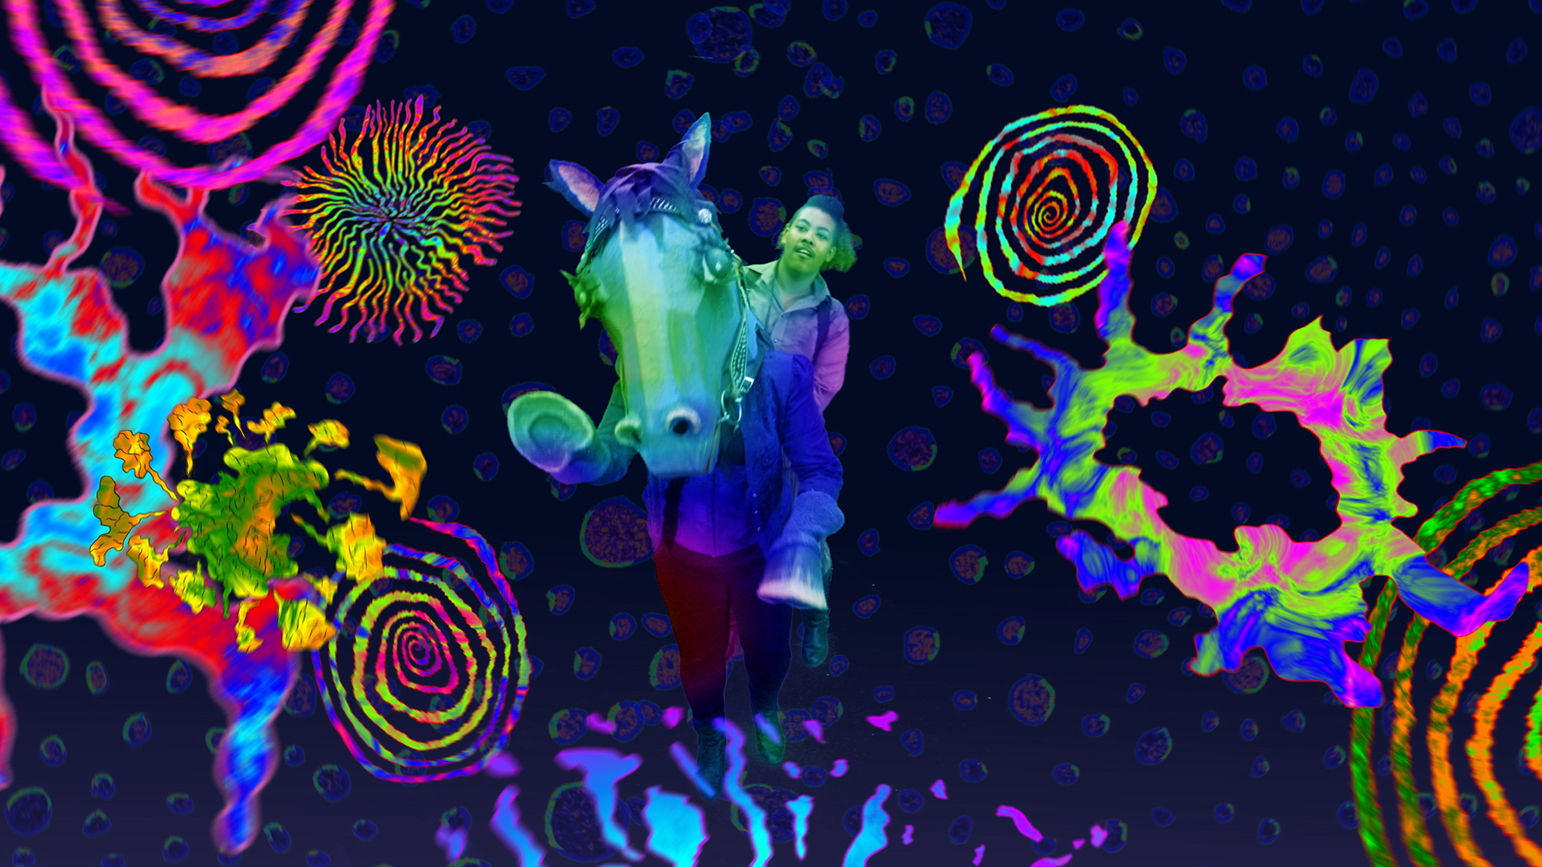 Image of a person riding a cartoon horse against a psychedelic background